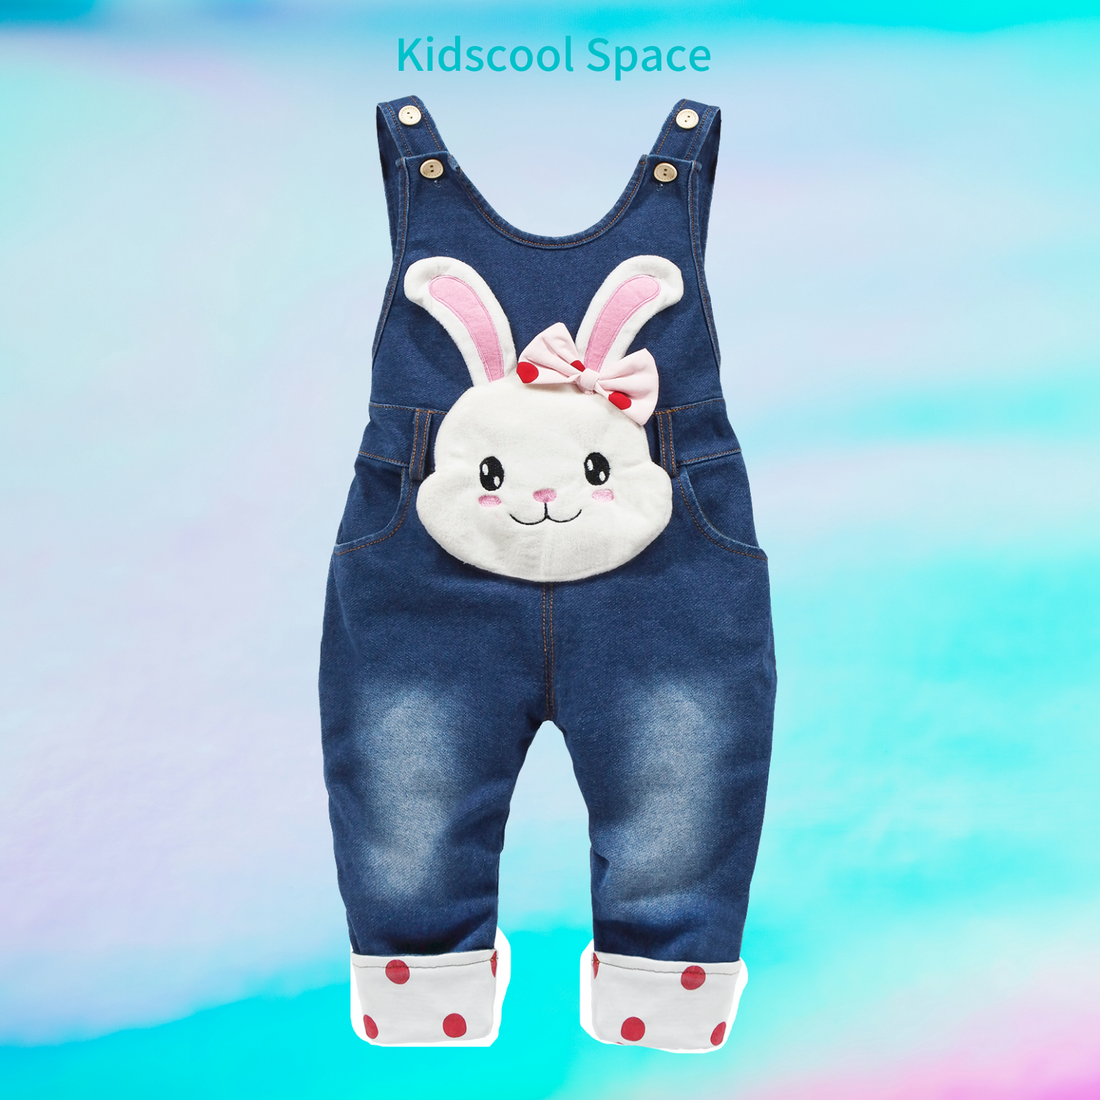 Kidscool Space, encouraged by its customers and its teammates, are becoming even more devoted to this glorious cause: Doing children's jeans.